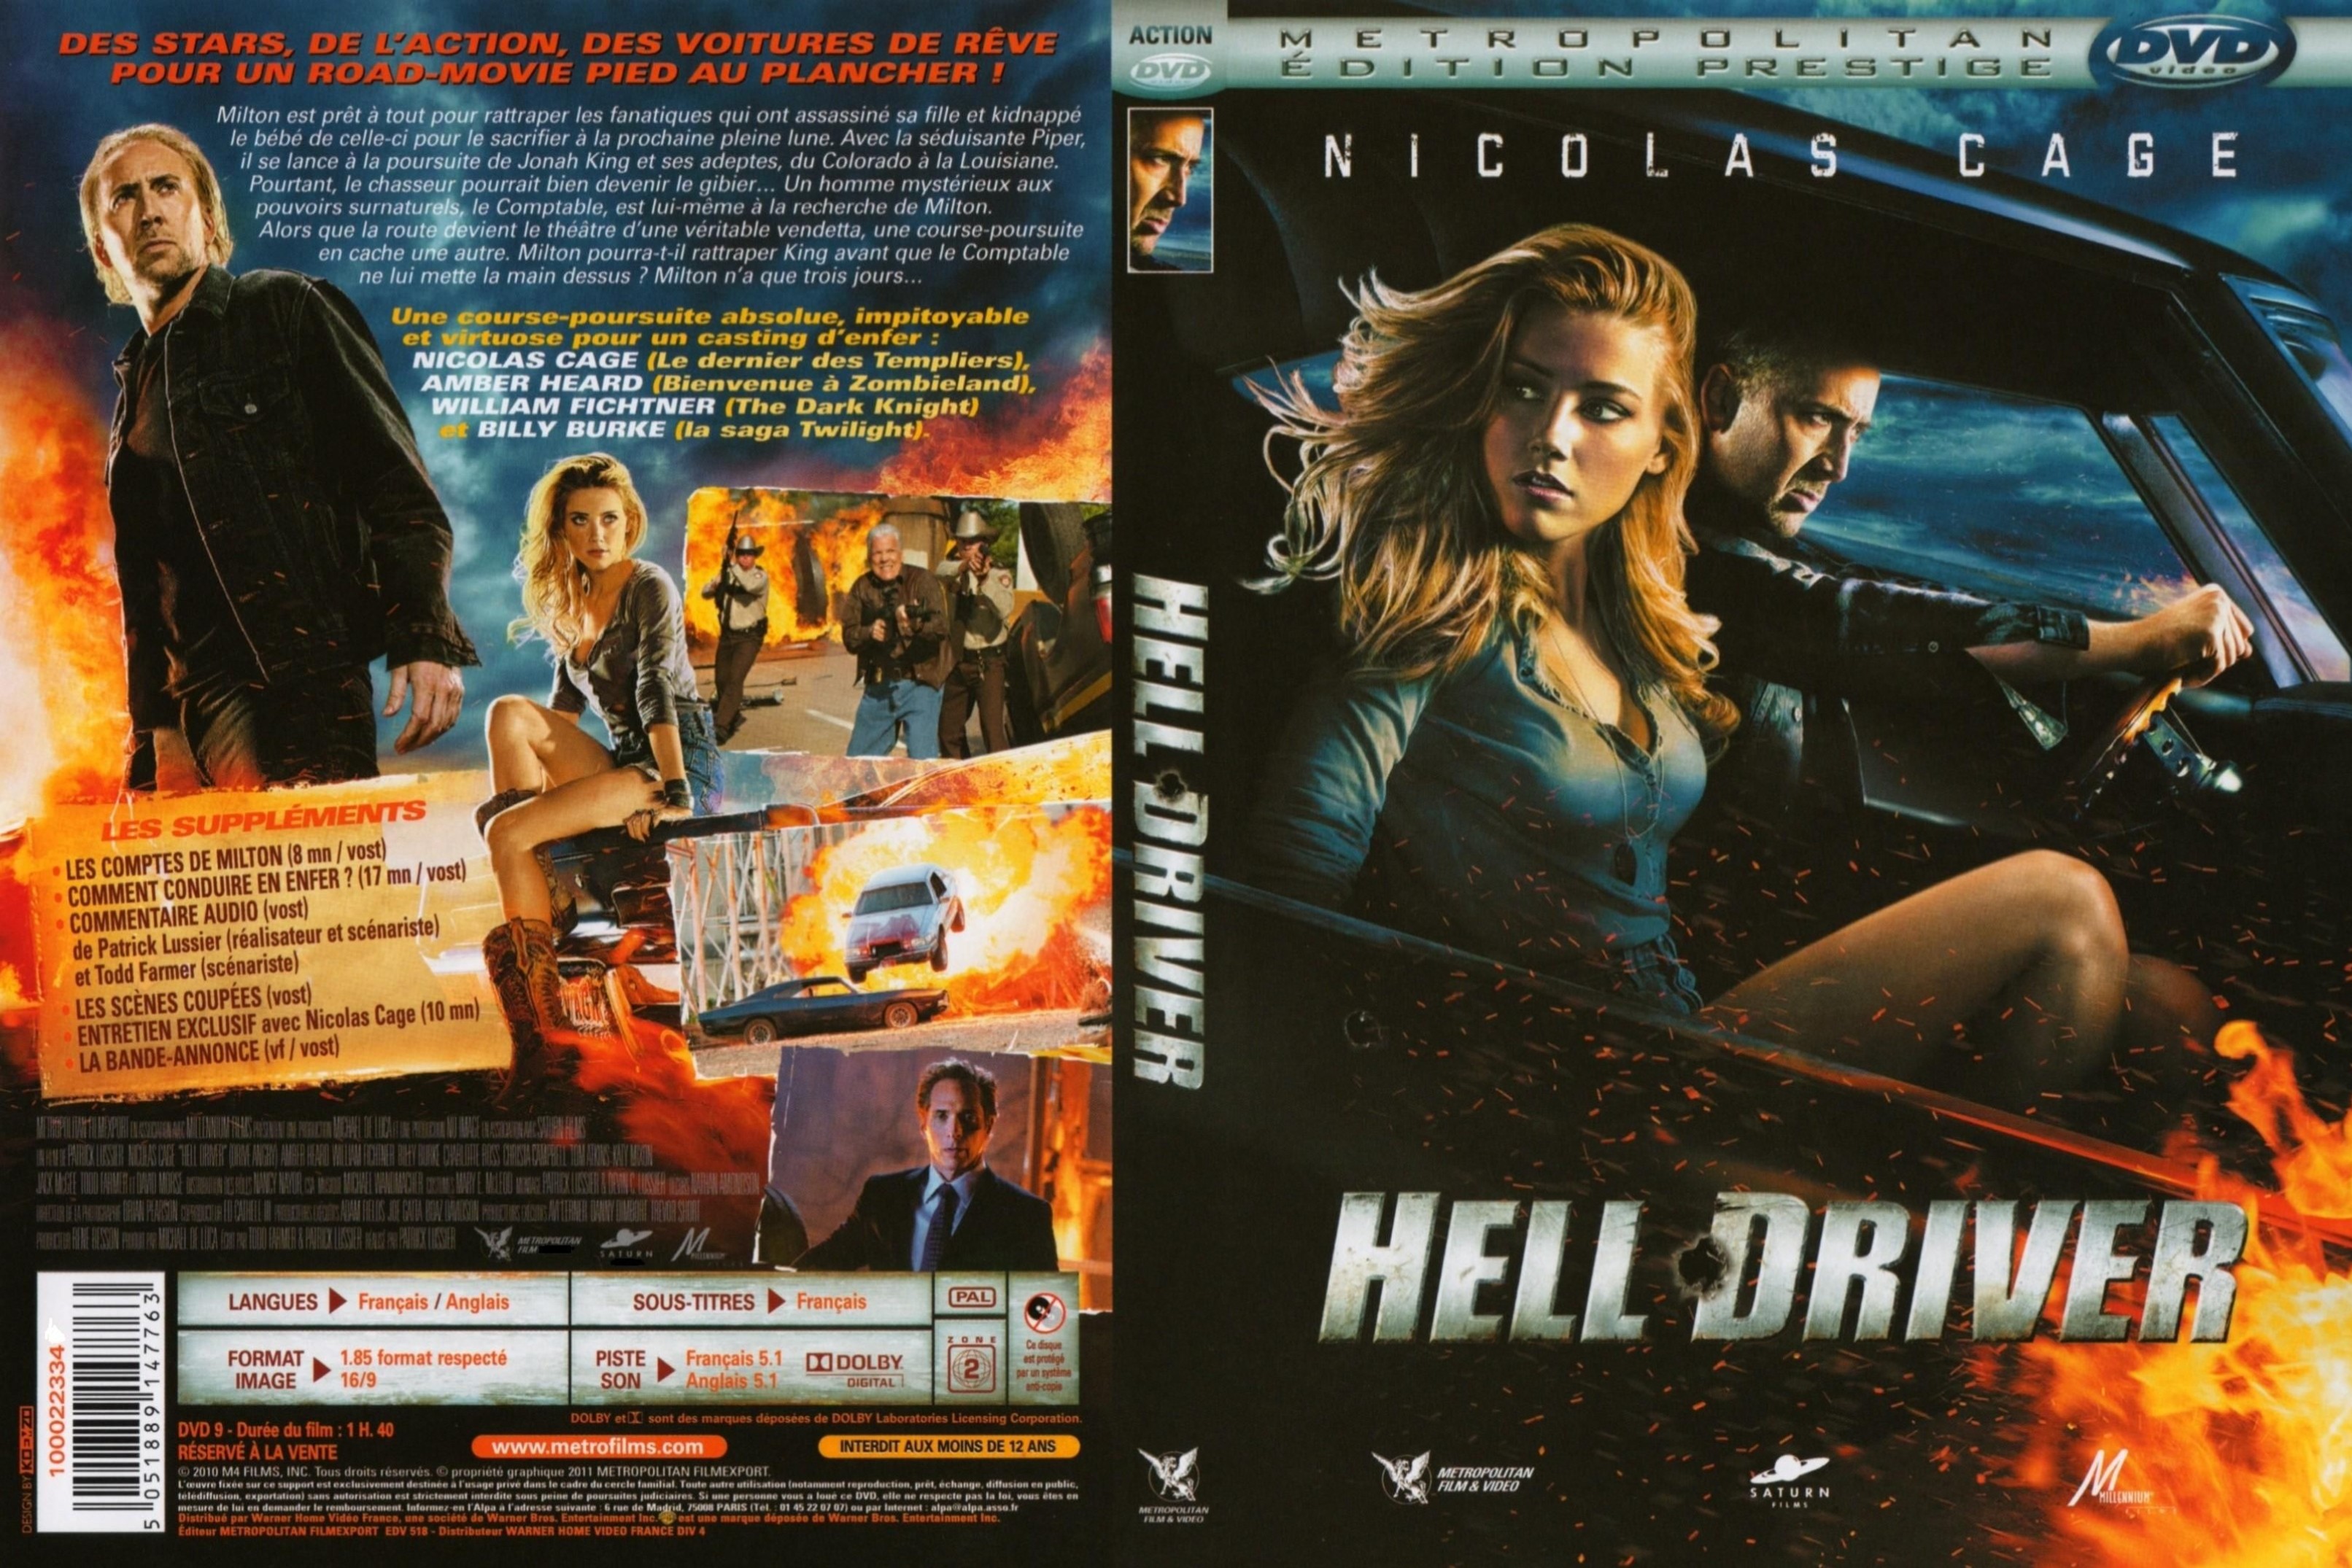 Jaquette DVD Hell Driver